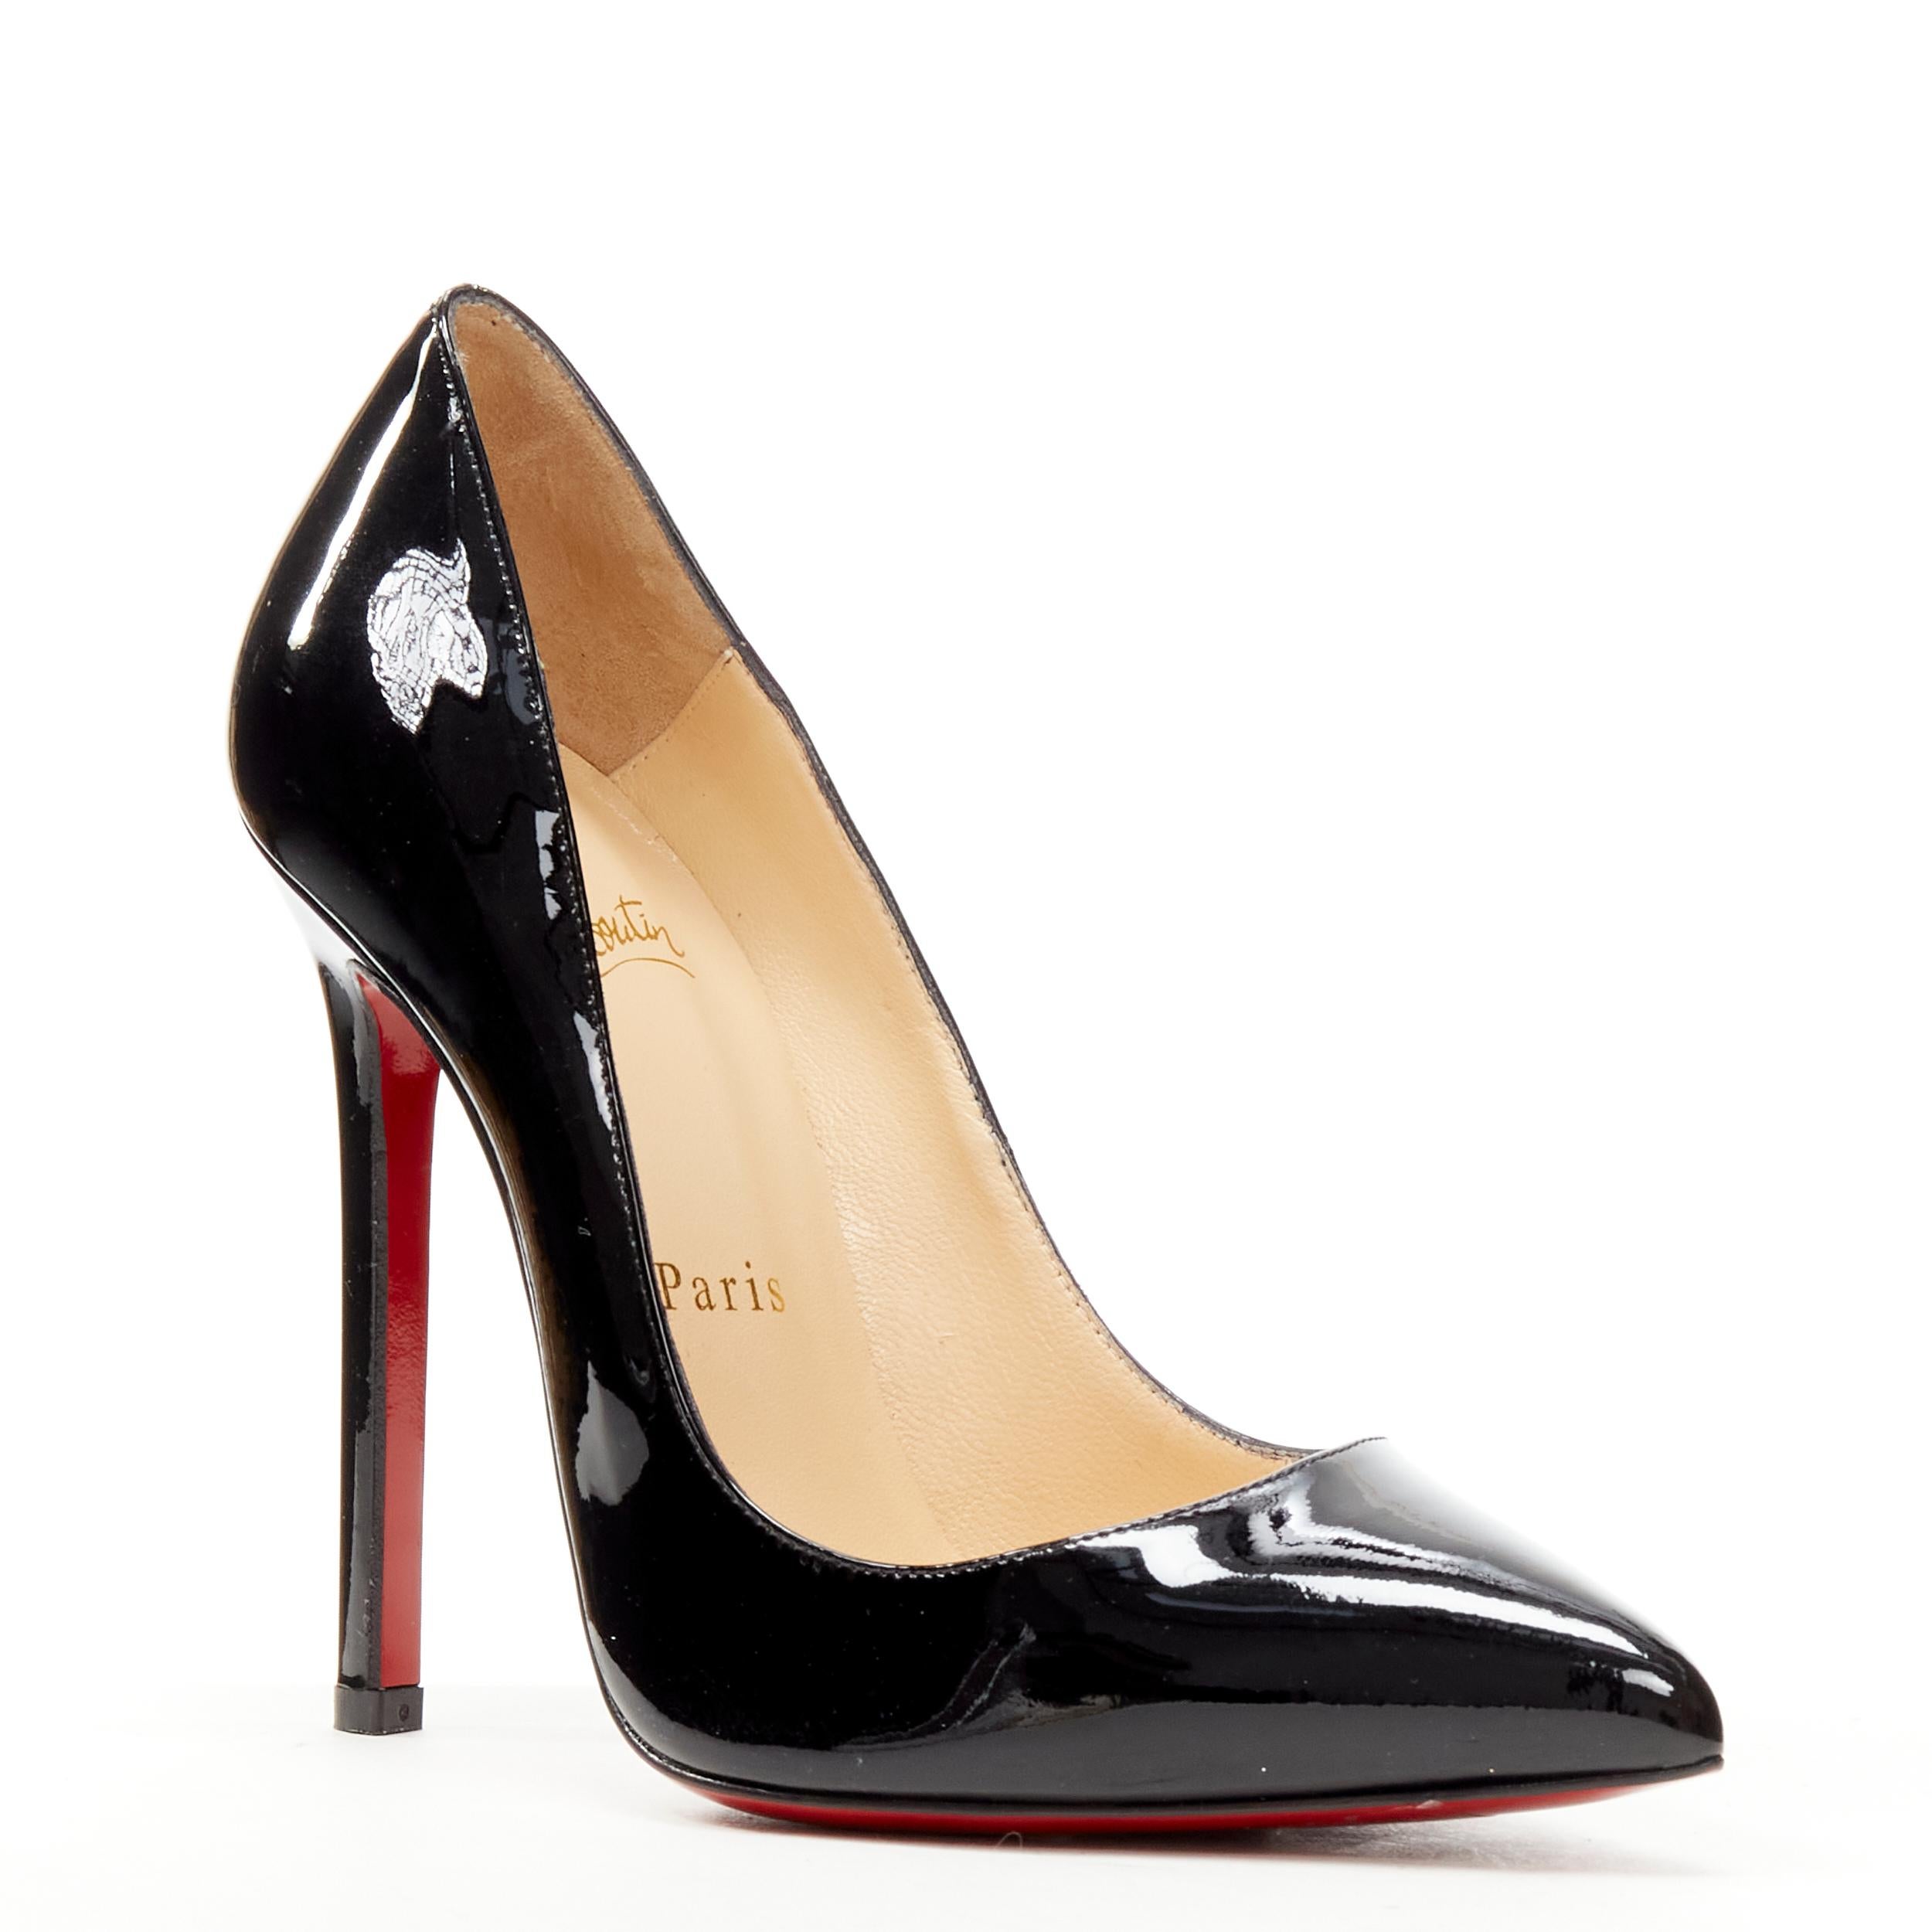 new CHRISTIAN LOUBOUTIN Pigalle 120 black patent stiletto pump EU36.5 
Reference: TGAS/C01124 
Brand: Christian Louboutin 
Designer: Christian Louboutin 
Model: Pigalle 120 
Material: Patent Leather 
Color: Black 
Pattern: Solid 
Made in: Italy